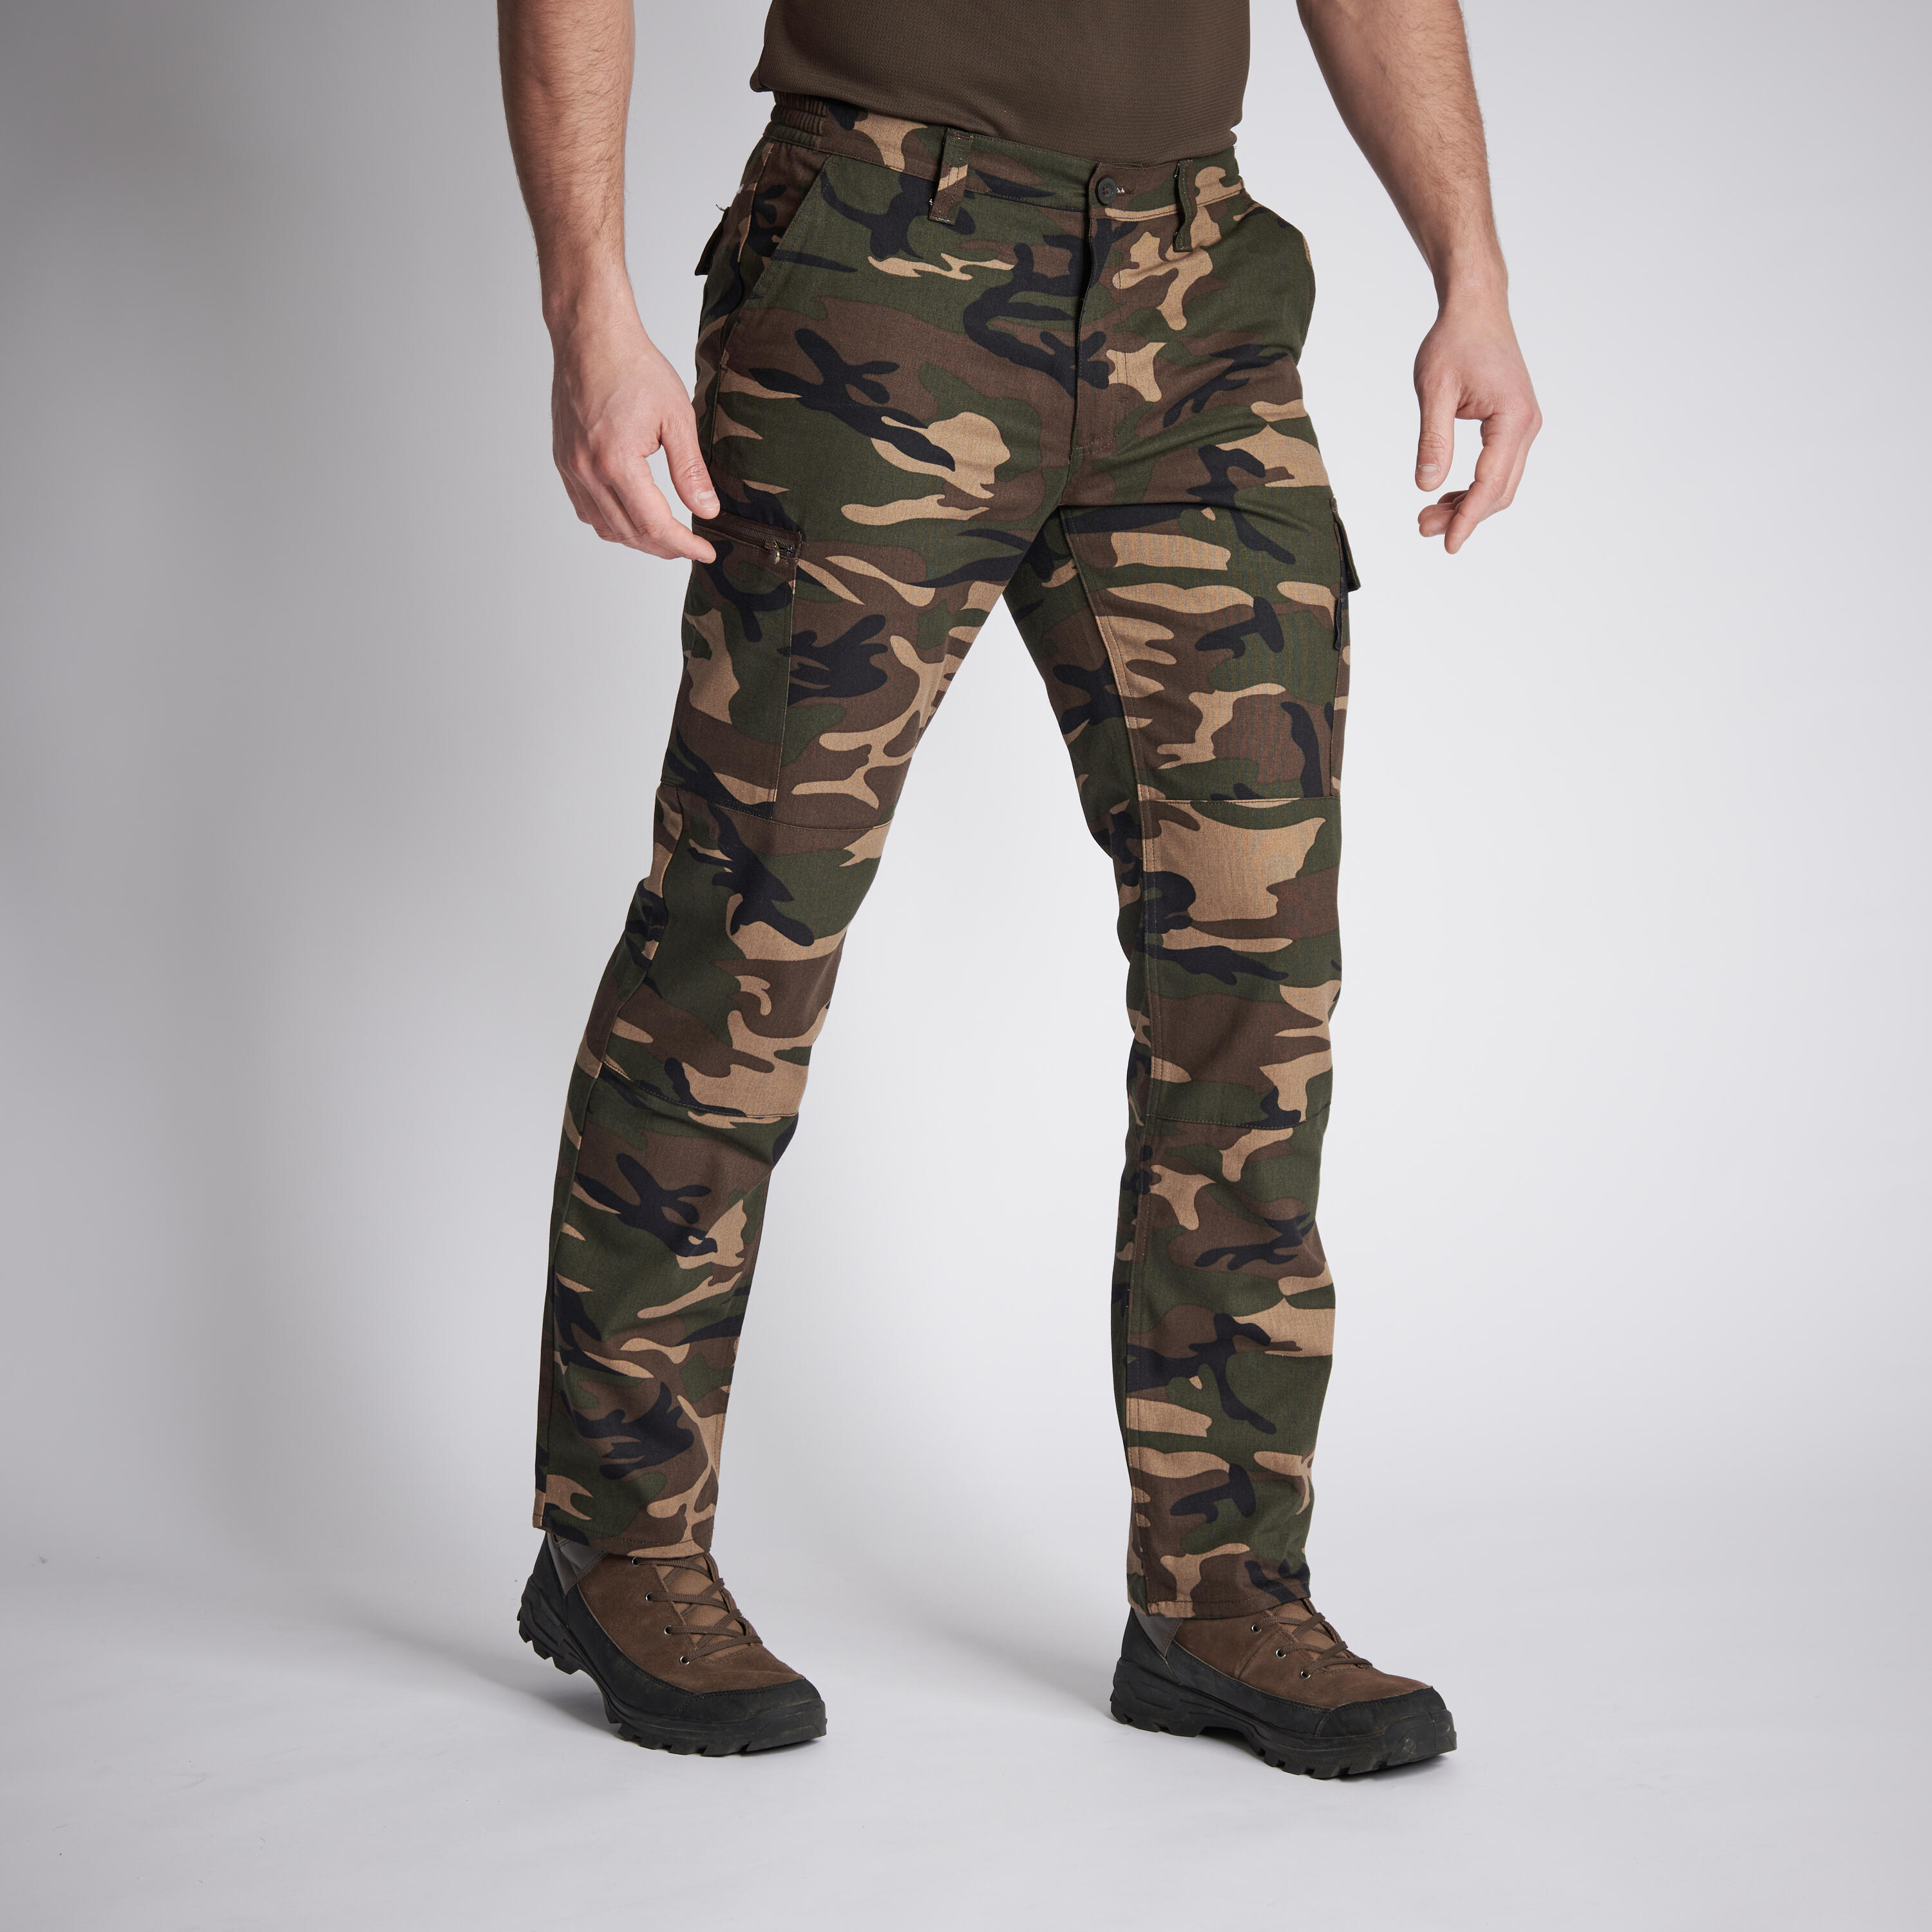 Woodland Camo MENS BDU Cargo Pants - Mens Military Camouflage Pants S TO 2X  - Simpson Advanced Chiropractic & Medical Center